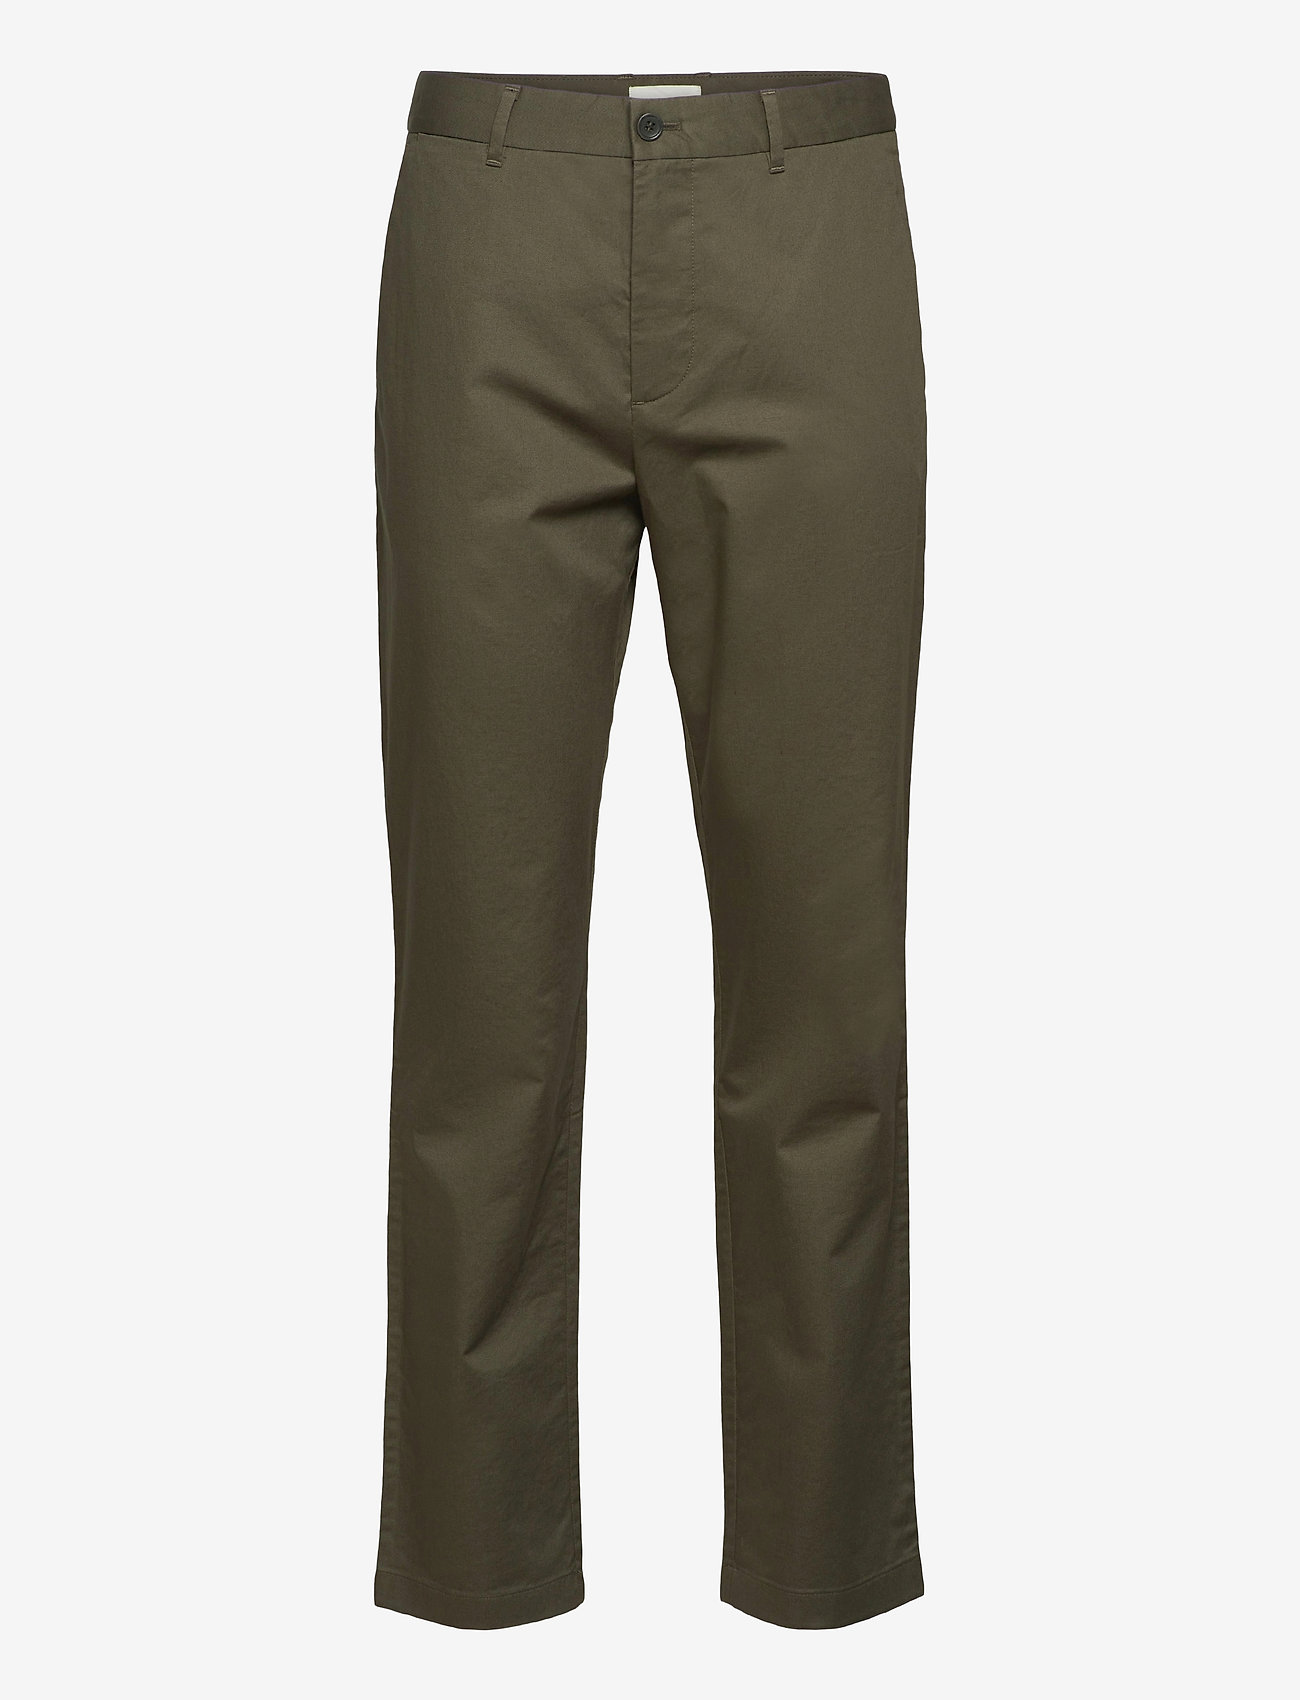 Wood Wood - Marcus light twill trousers - chinot - olive - 0